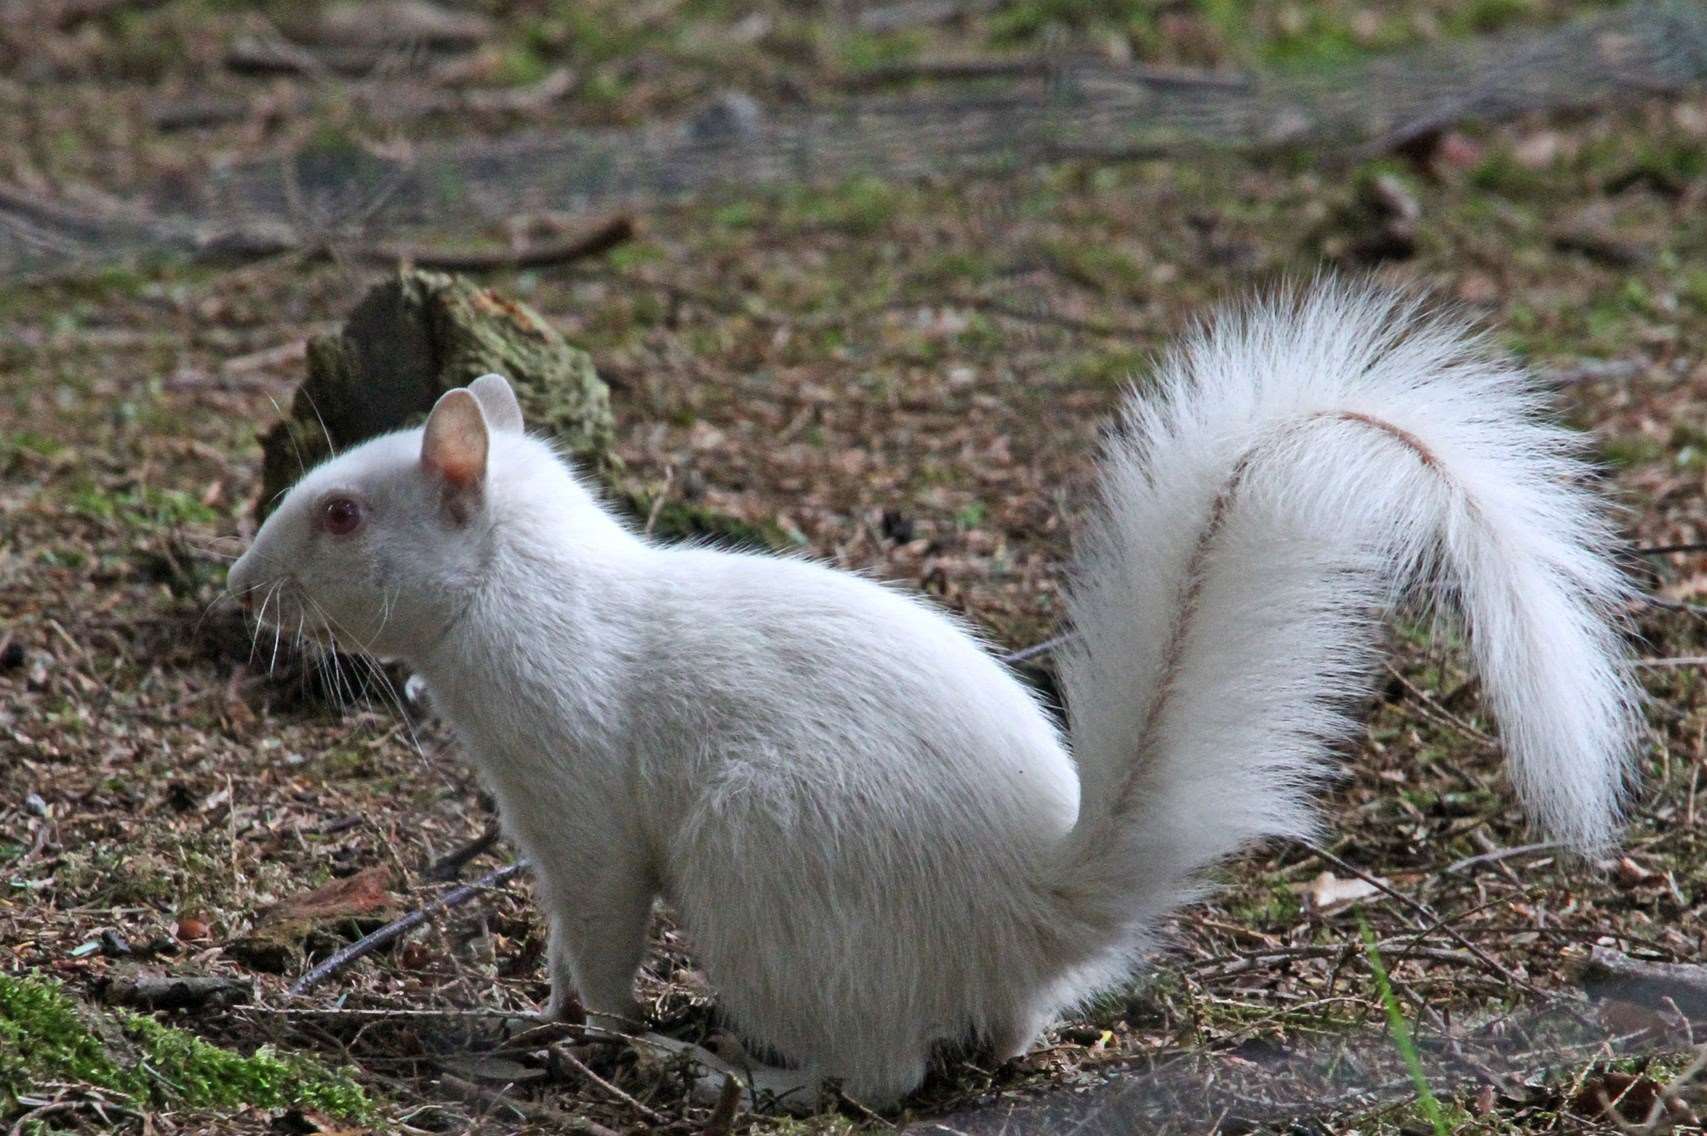 An albino squirrel was spotted at Wildwood. Picture: Dave Butcher